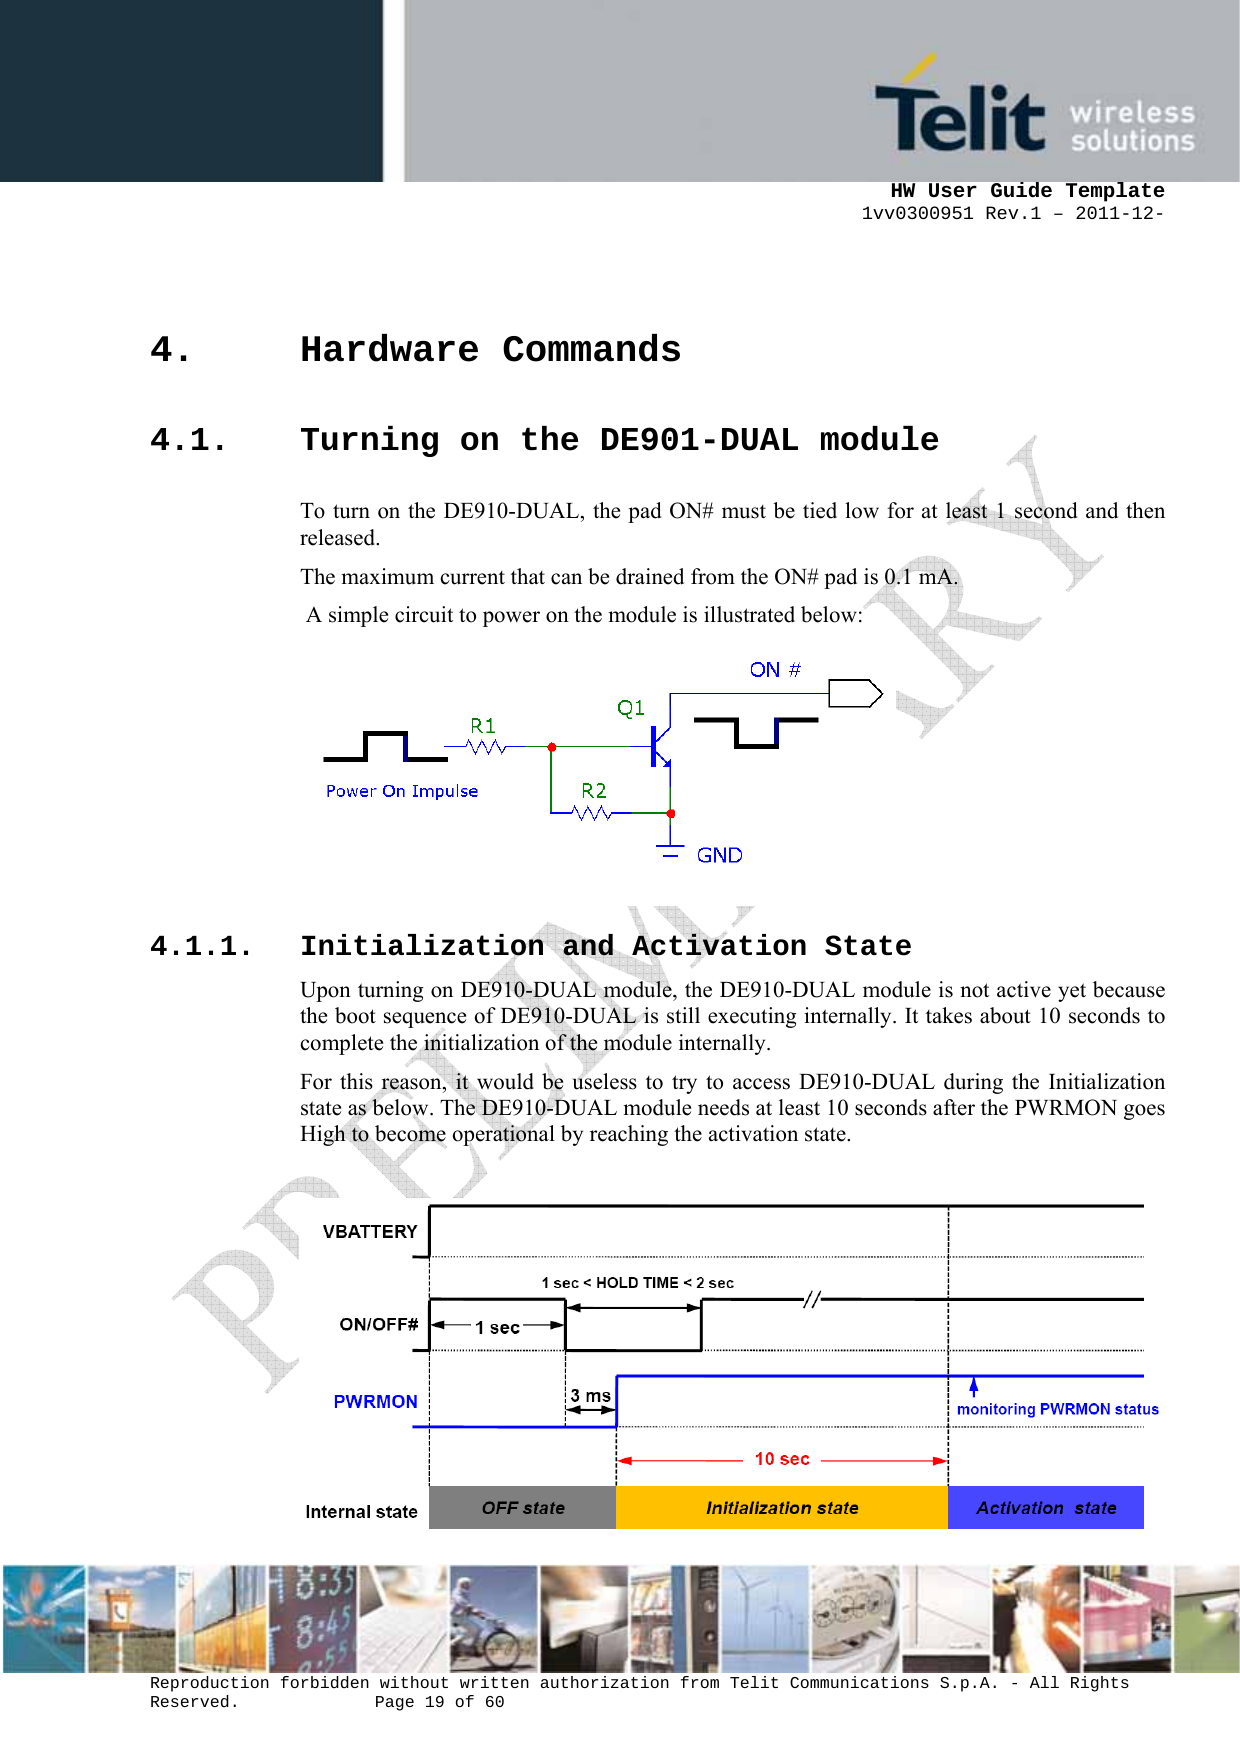      HW User Guide Template 1vv0300951 Rev.1 – 2011-12-  Reproduction forbidden without written authorization from Telit Communications S.p.A. - All Rights Reserved.    Page 19 of 60                                                     4. Hardware Commands 4.1. Turning on the DE901-DUAL module To turn on the DE910-DUAL, the pad ON# must be tied low for at least 1 second and then released. The maximum current that can be drained from the ON# pad is 0.1 mA.  A simple circuit to power on the module is illustrated below:   4.1.1. Initialization and Activation State Upon turning on DE910-DUAL module, the DE910-DUAL module is not active yet because the boot sequence of DE910-DUAL is still executing internally. It takes about 10 seconds to complete the initialization of the module internally. For this reason, it would be useless to try to access DE910-DUAL during the Initialization state as below. The DE910-DUAL module needs at least 10 seconds after the PWRMON goes High to become operational by reaching the activation state.    